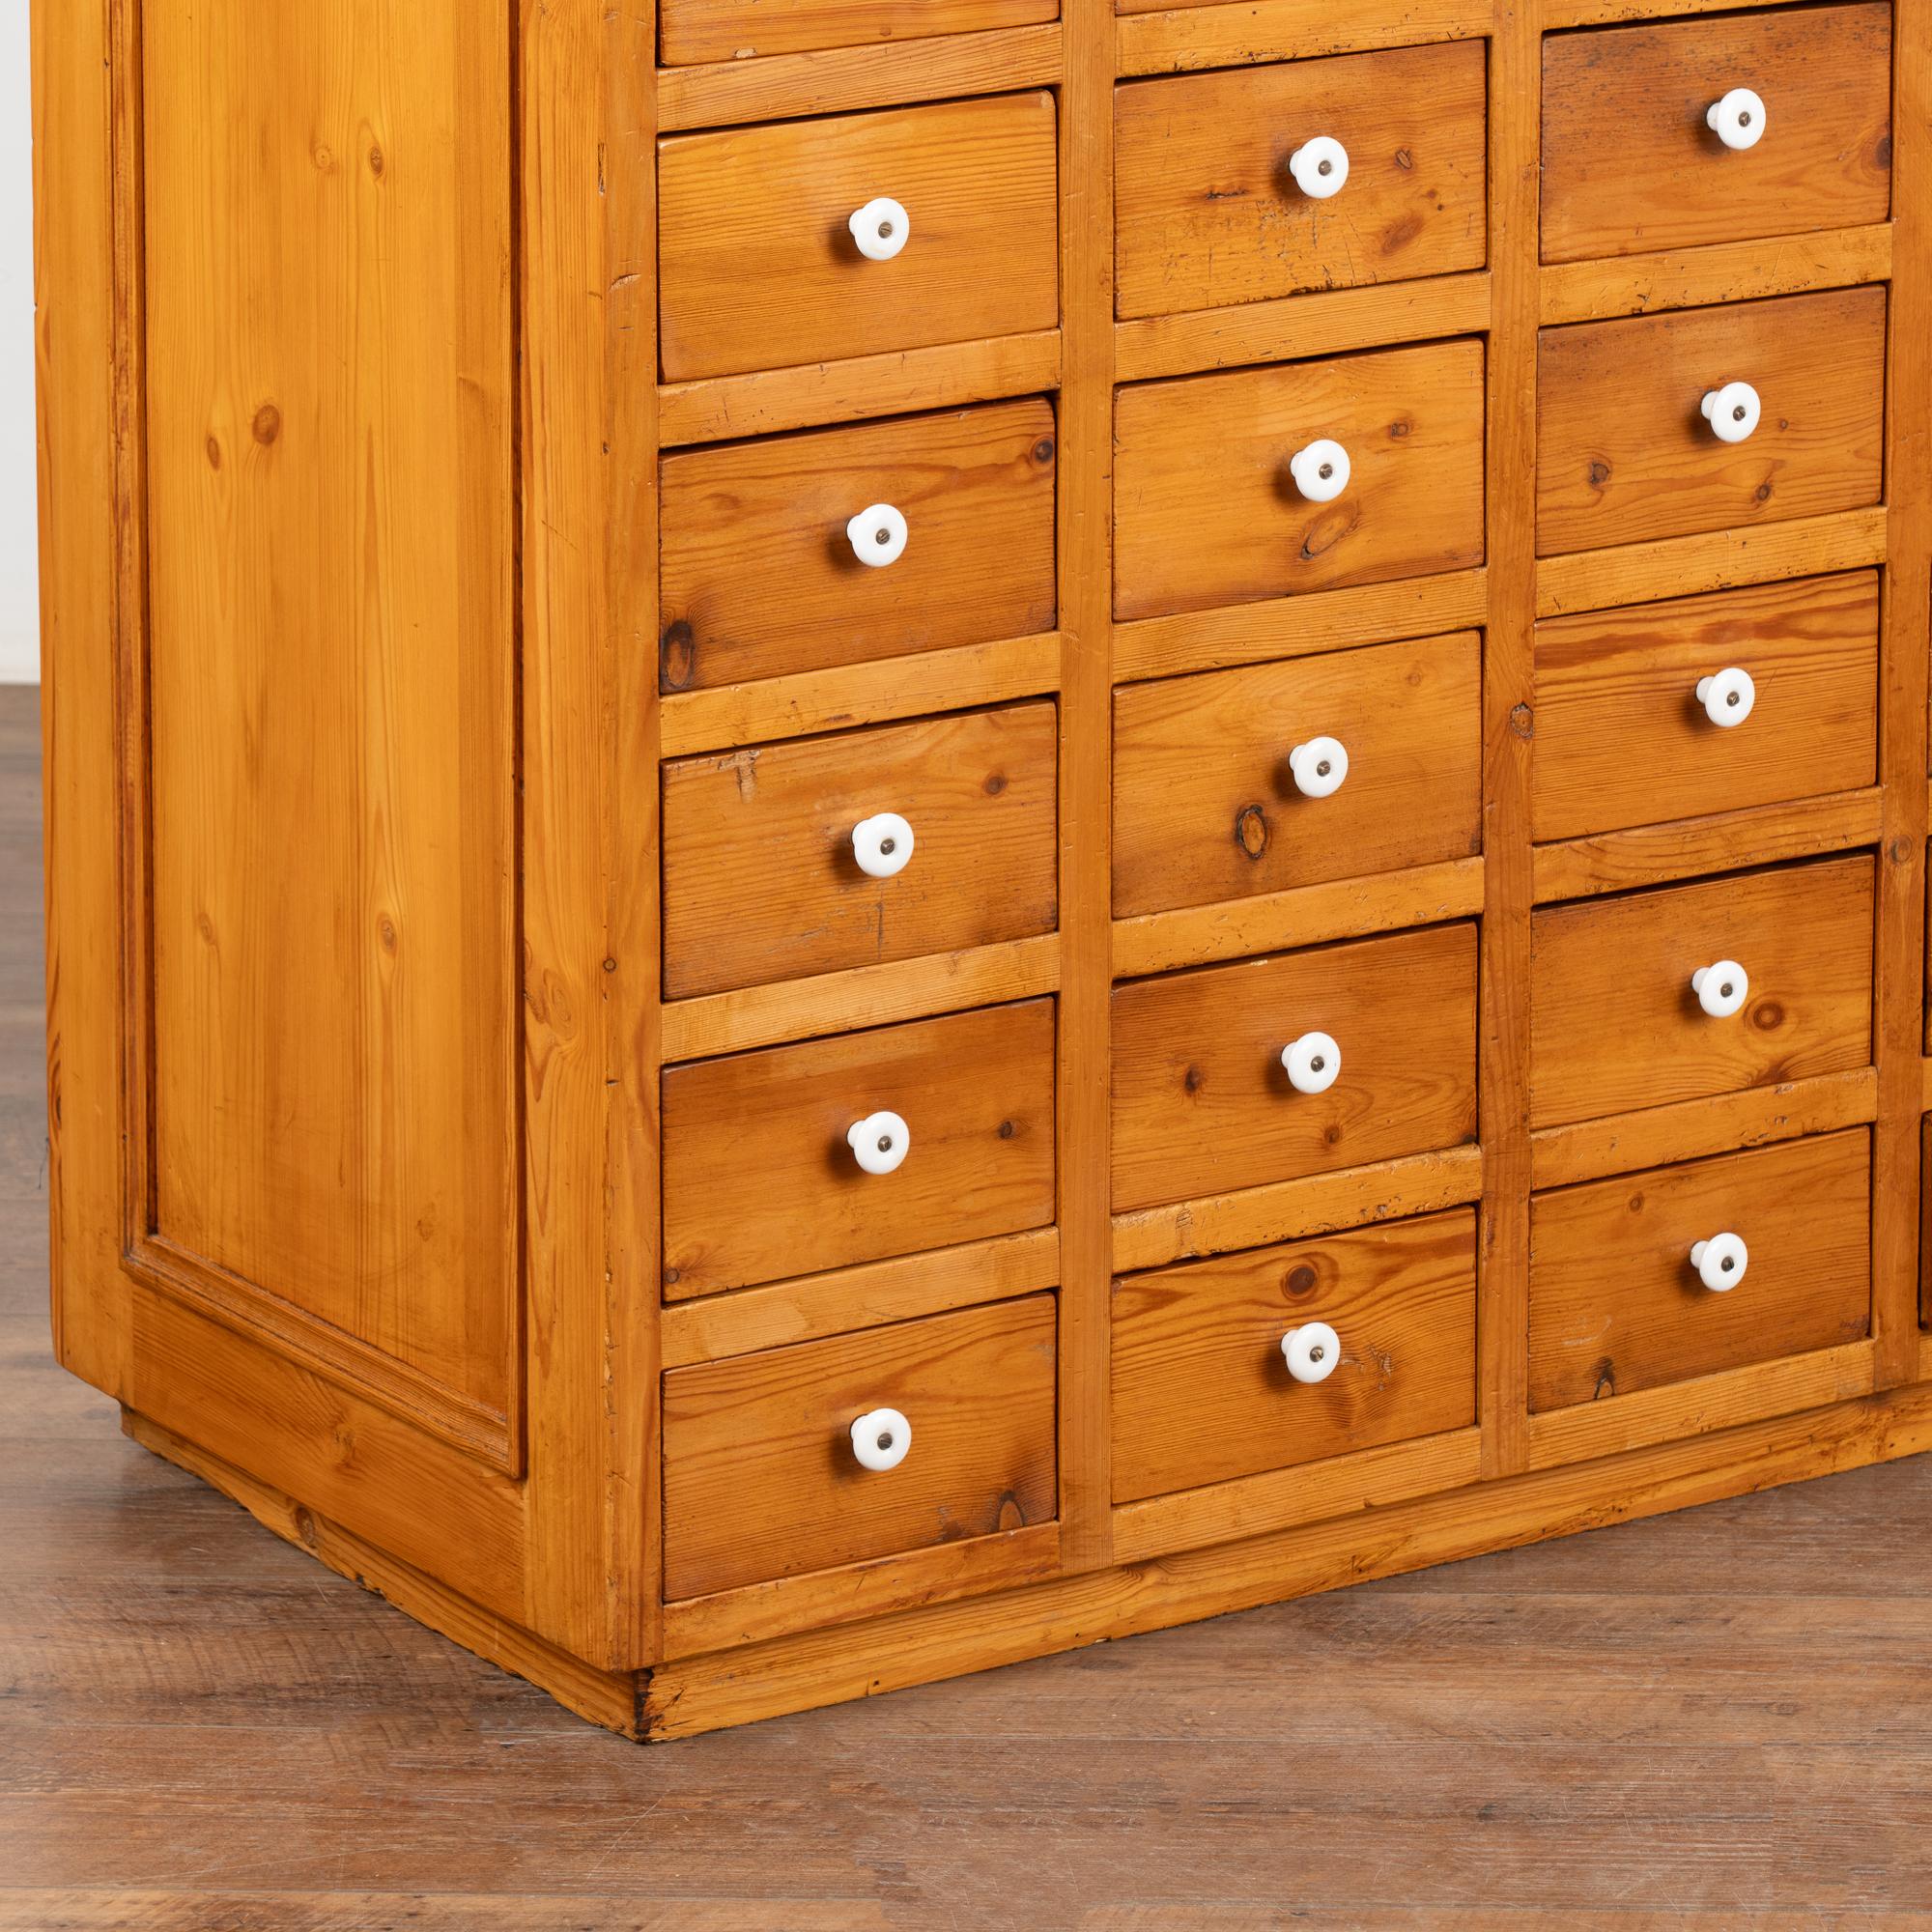 20th Century Free Standing Pine Apothecary Counter with 64 Drawers, Kitchen Island circa 1900 For Sale